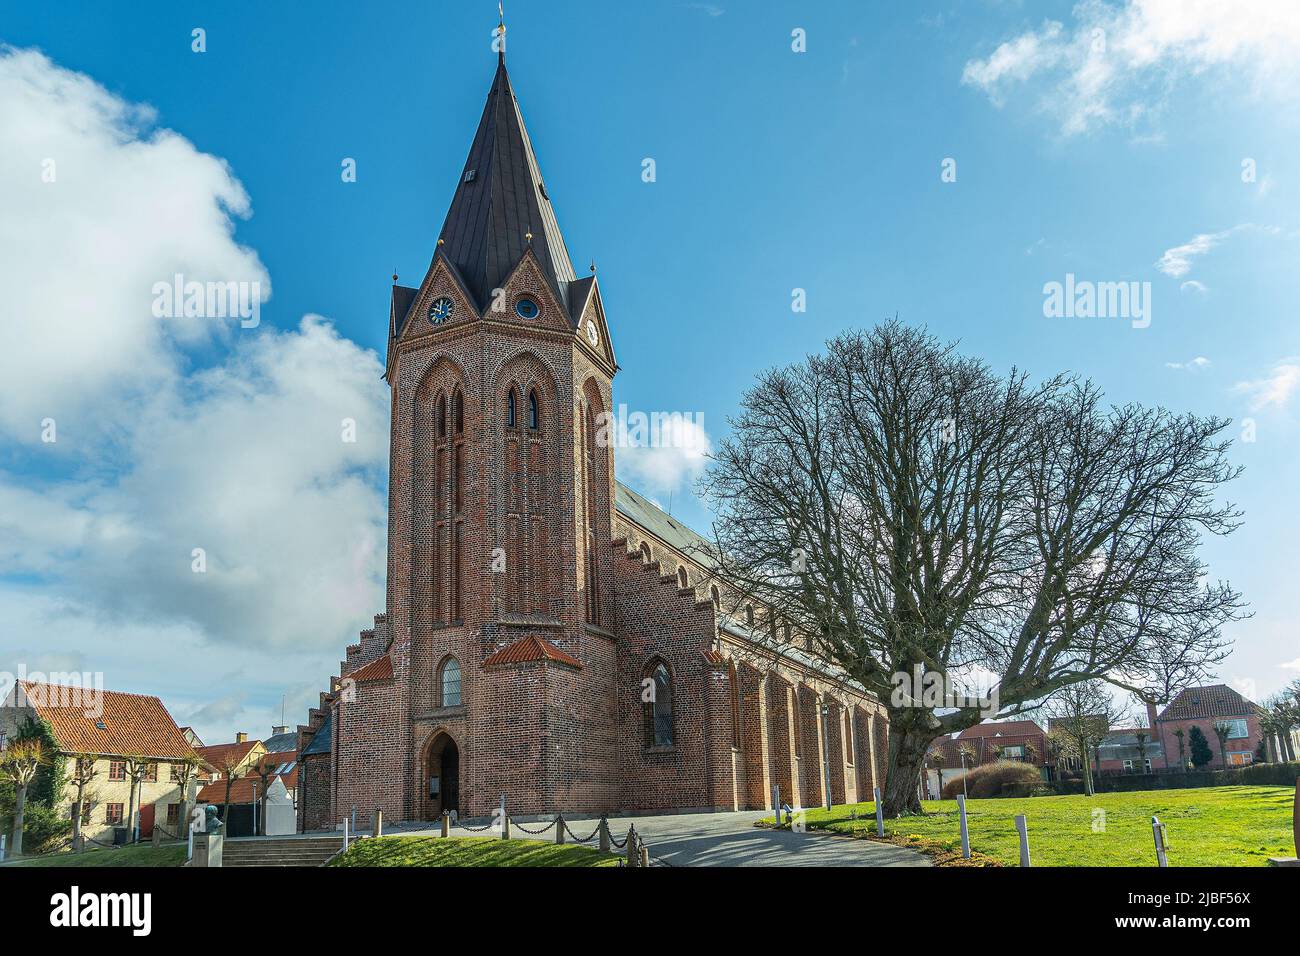 The octagonal bell tower of the Church of Our Lady in Assens. It is a parish church of the Church of Denmark. Assens, Fynn, Denmark, Europe Stock Photo